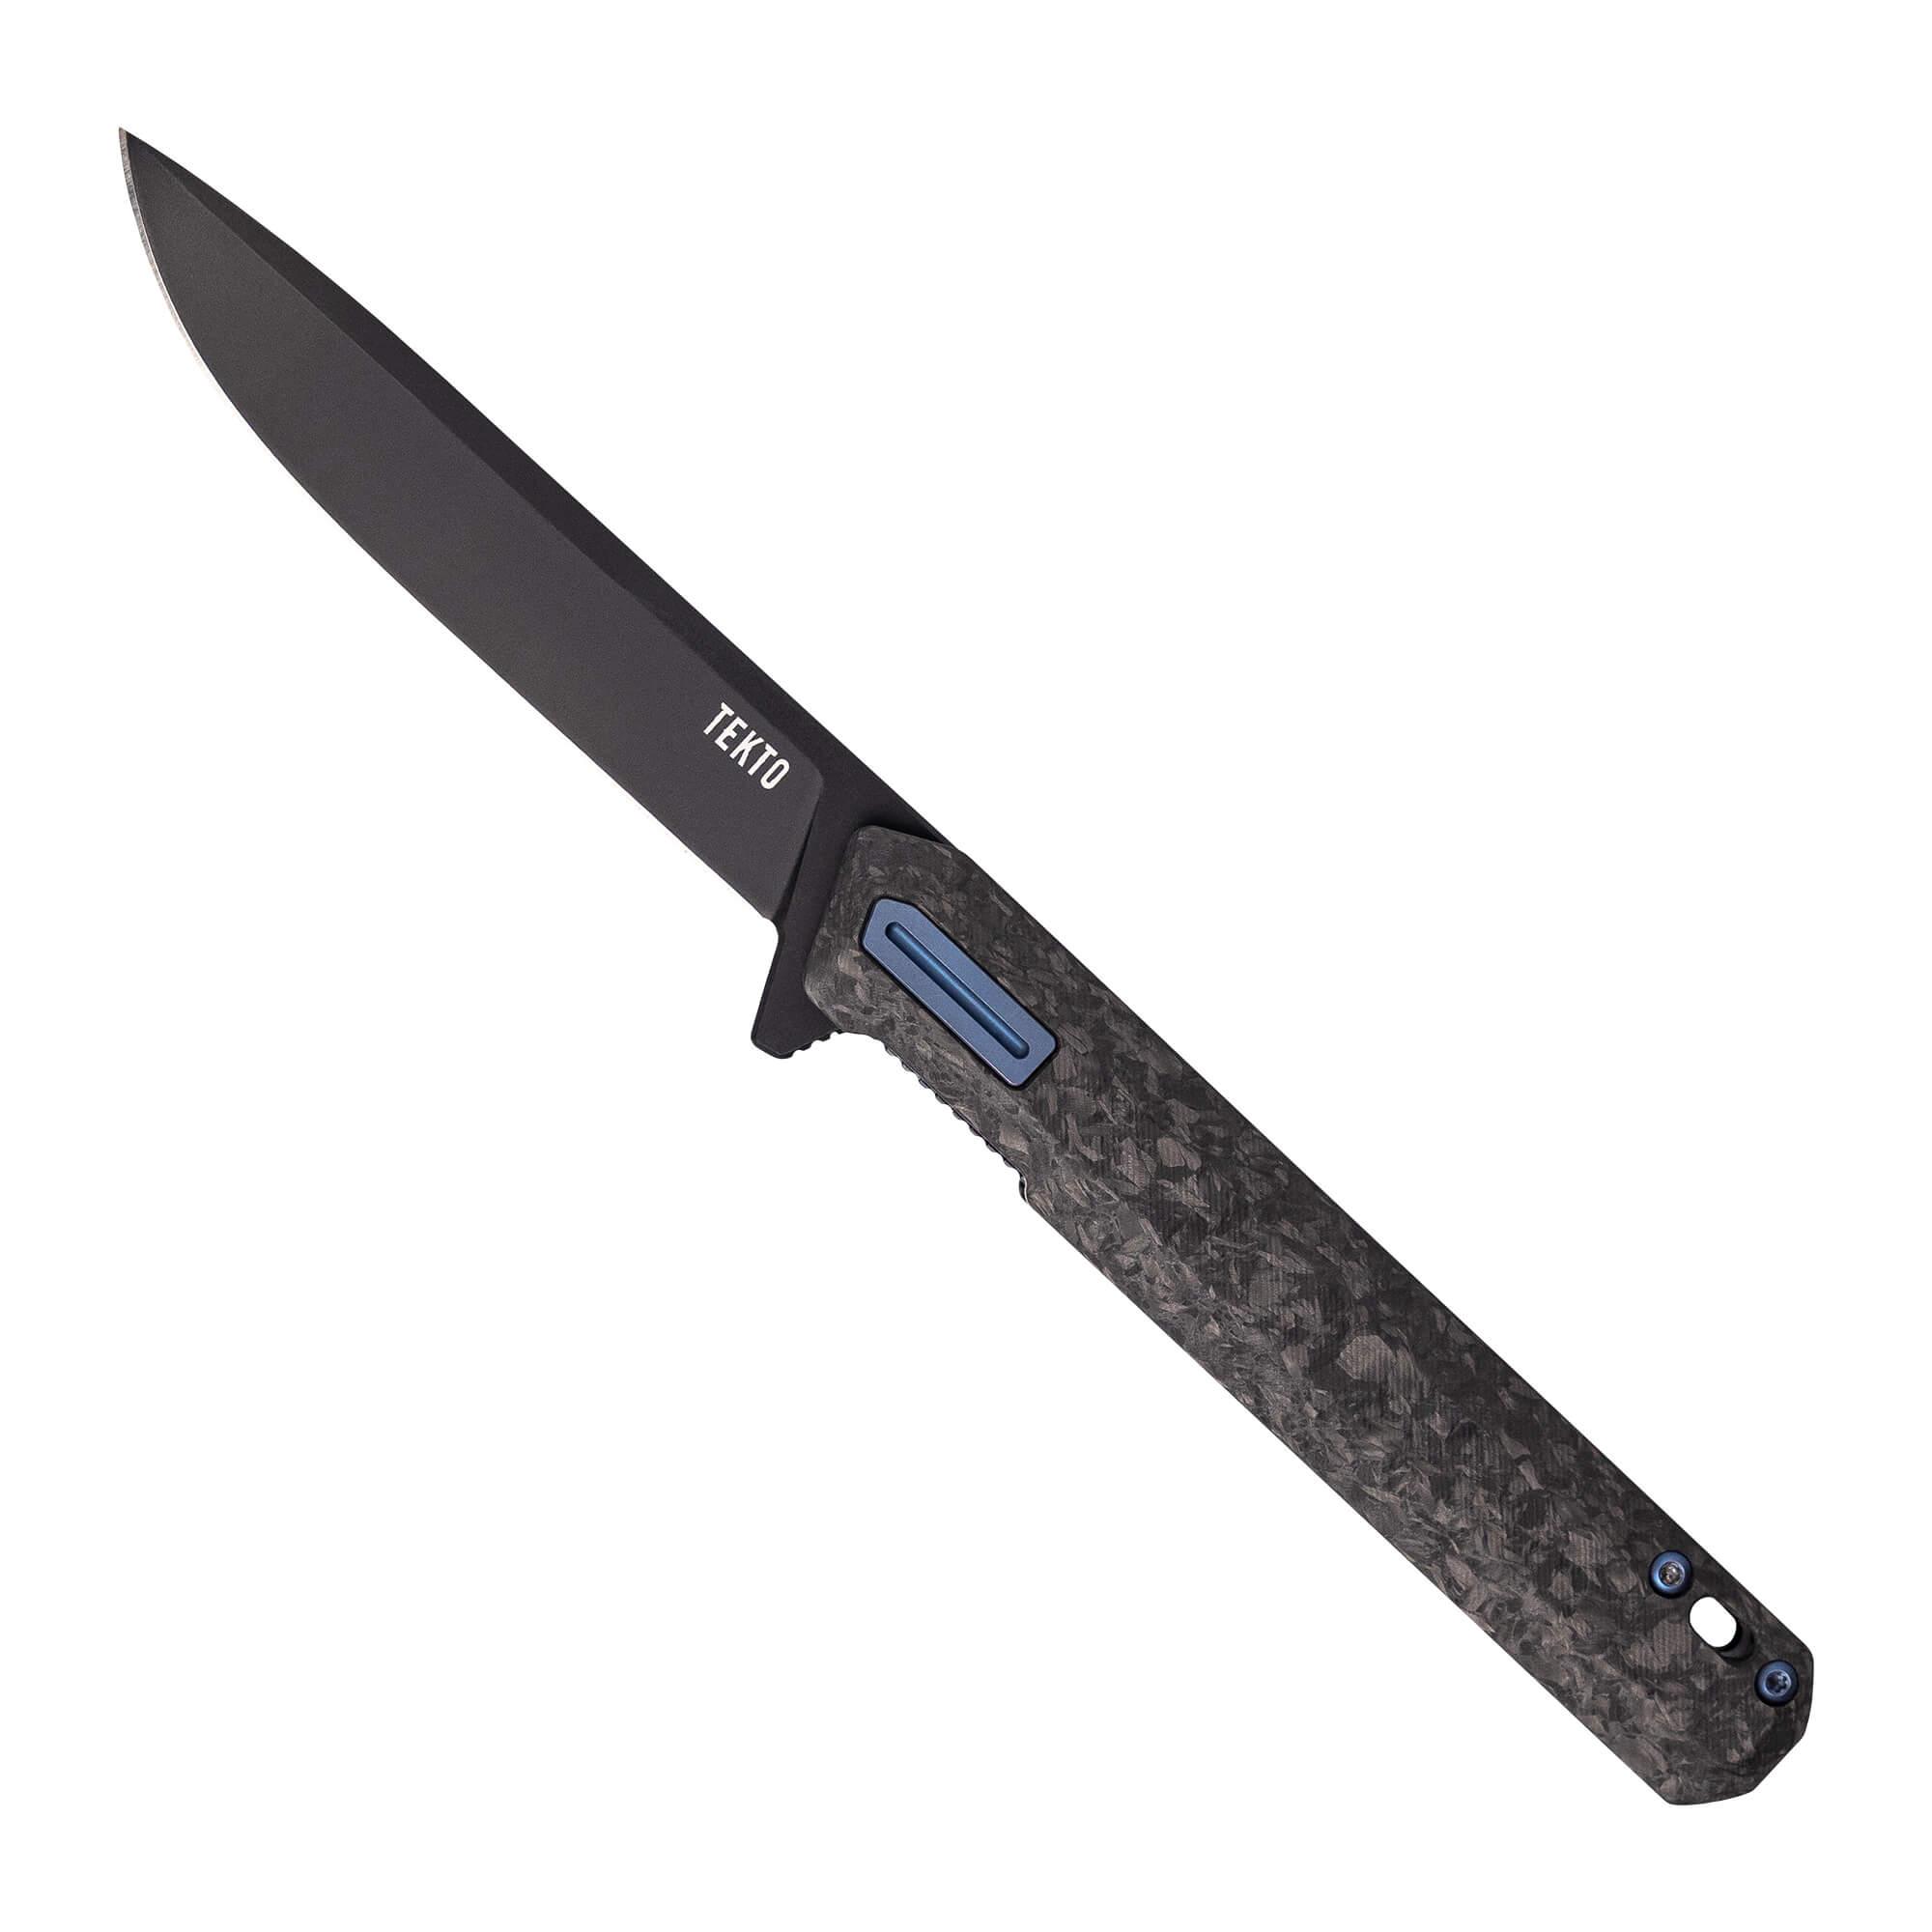 F2 Bravo - Forged Carbon // Blue Accents - Purpose-Built / Home of the Trades